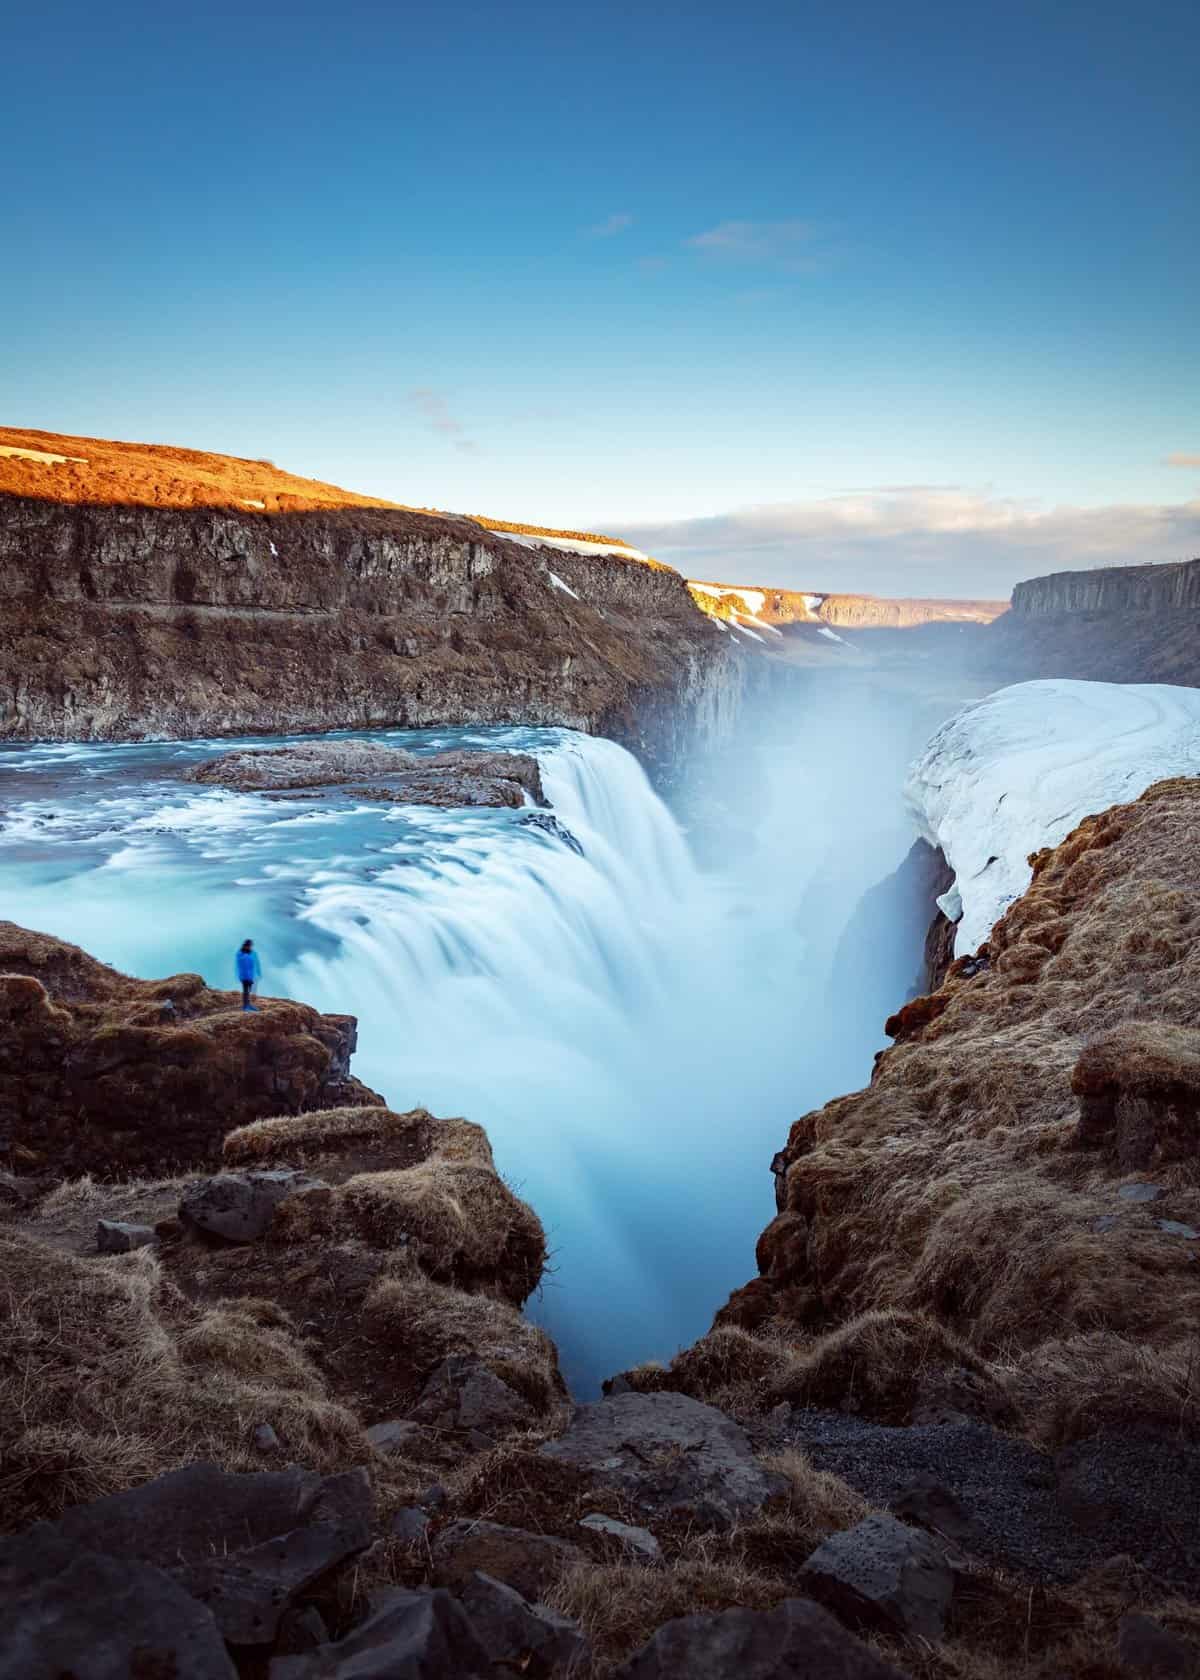 Gullfoss Falls, Iceland with a person standing and watching the water falls as the sun sets.